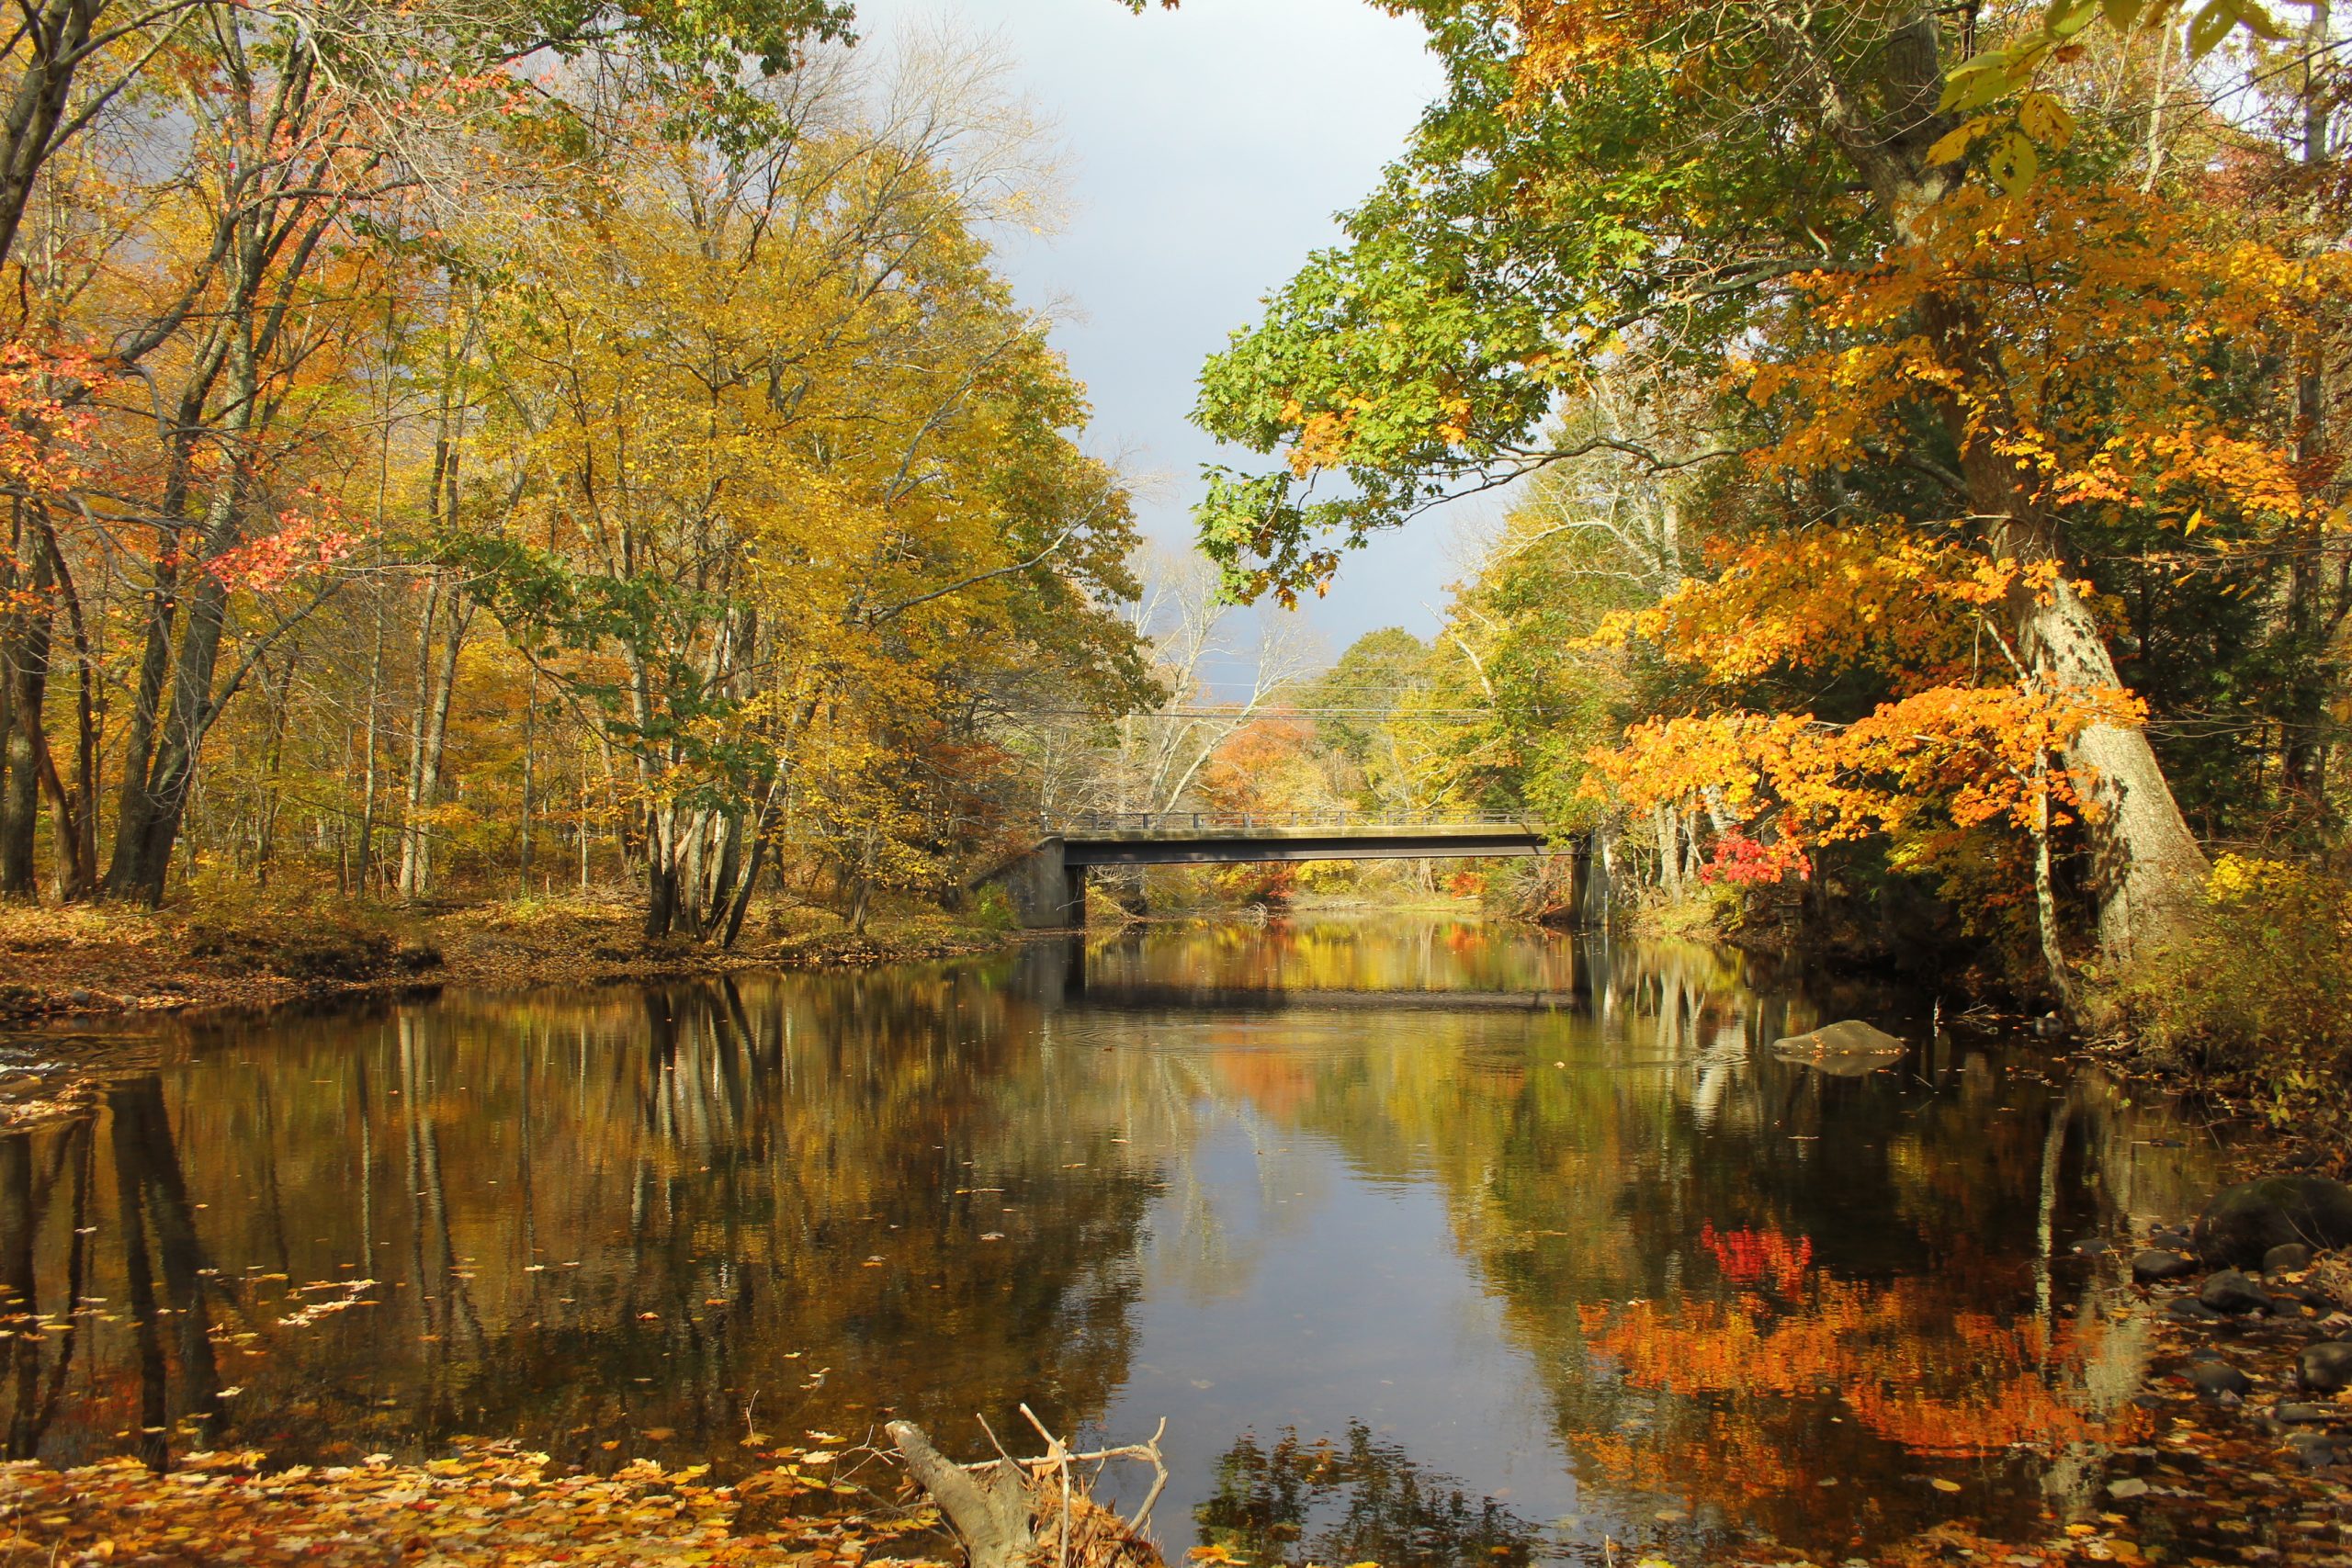 The Willimantic River In Storrs, Ct (user submitted)